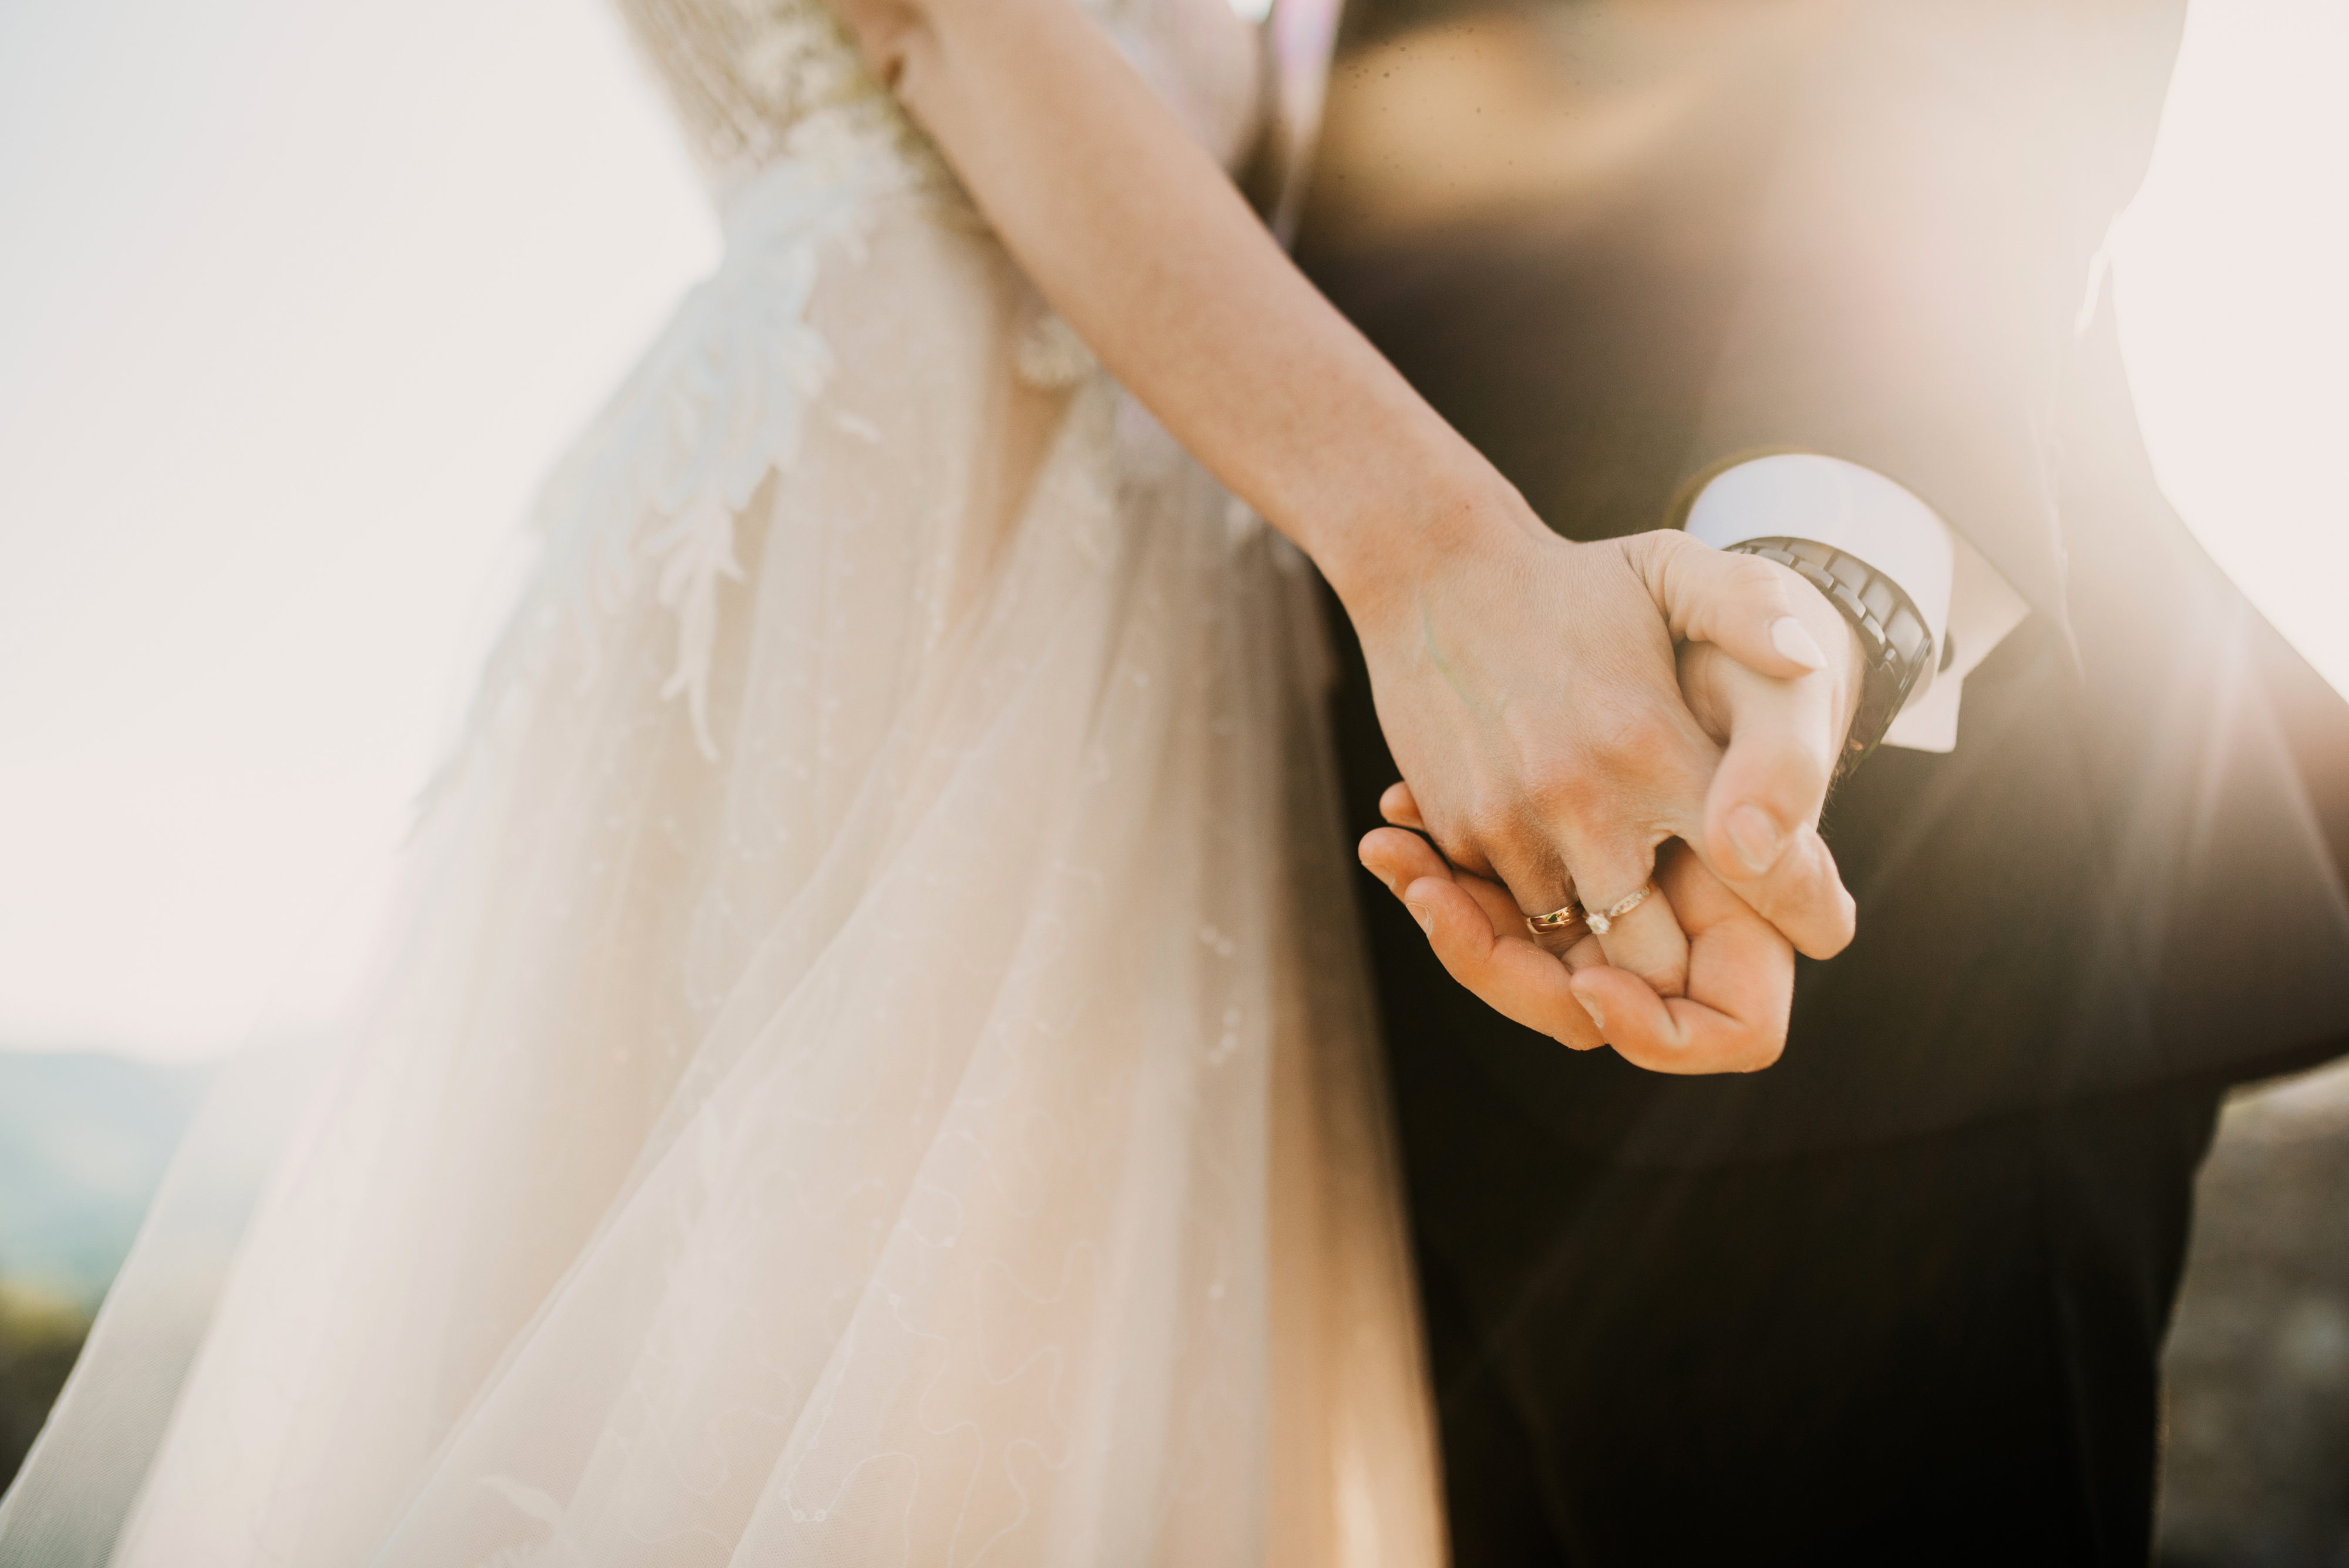 A bride and groom hold hands tightly, showcasing their wedding rings. The bride&#x27;s lacy dress and the groom&#x27;s suit sleeve with cufflinks are visible